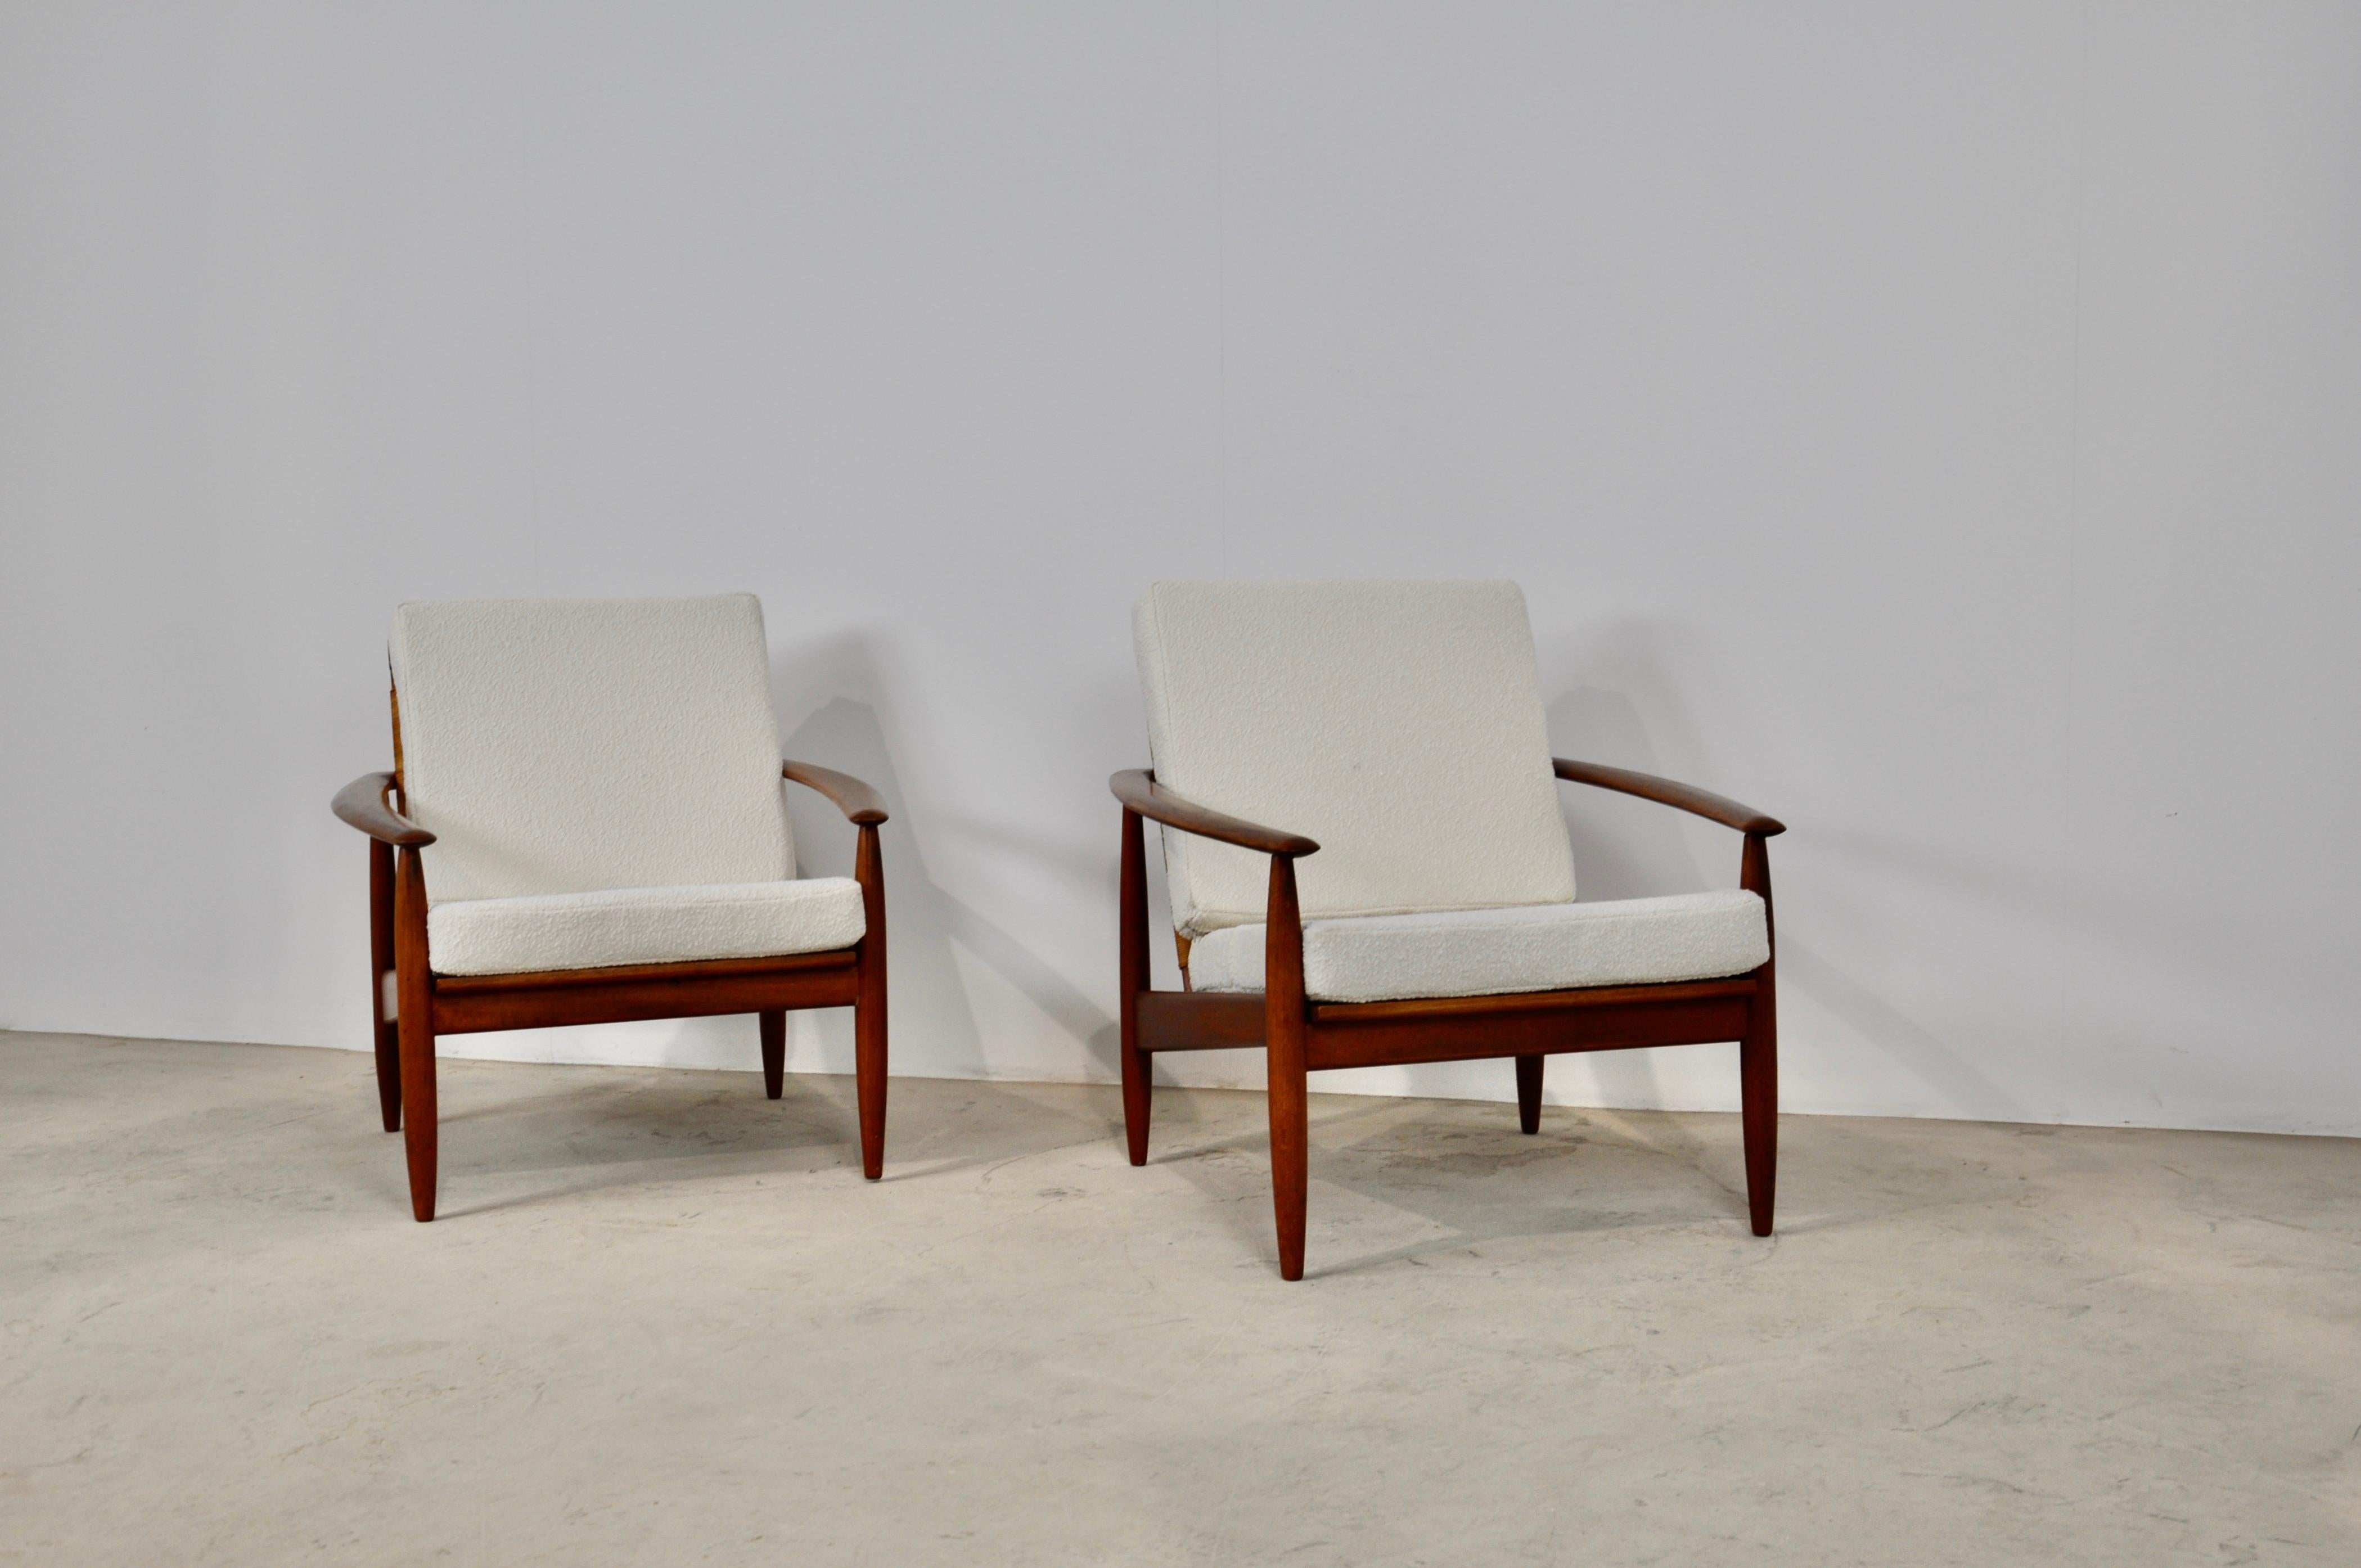 Pair of armchairs in wood, wicker and fabric.
Measure: Seat height 40cm. Wear due to time and age of the armchairs.